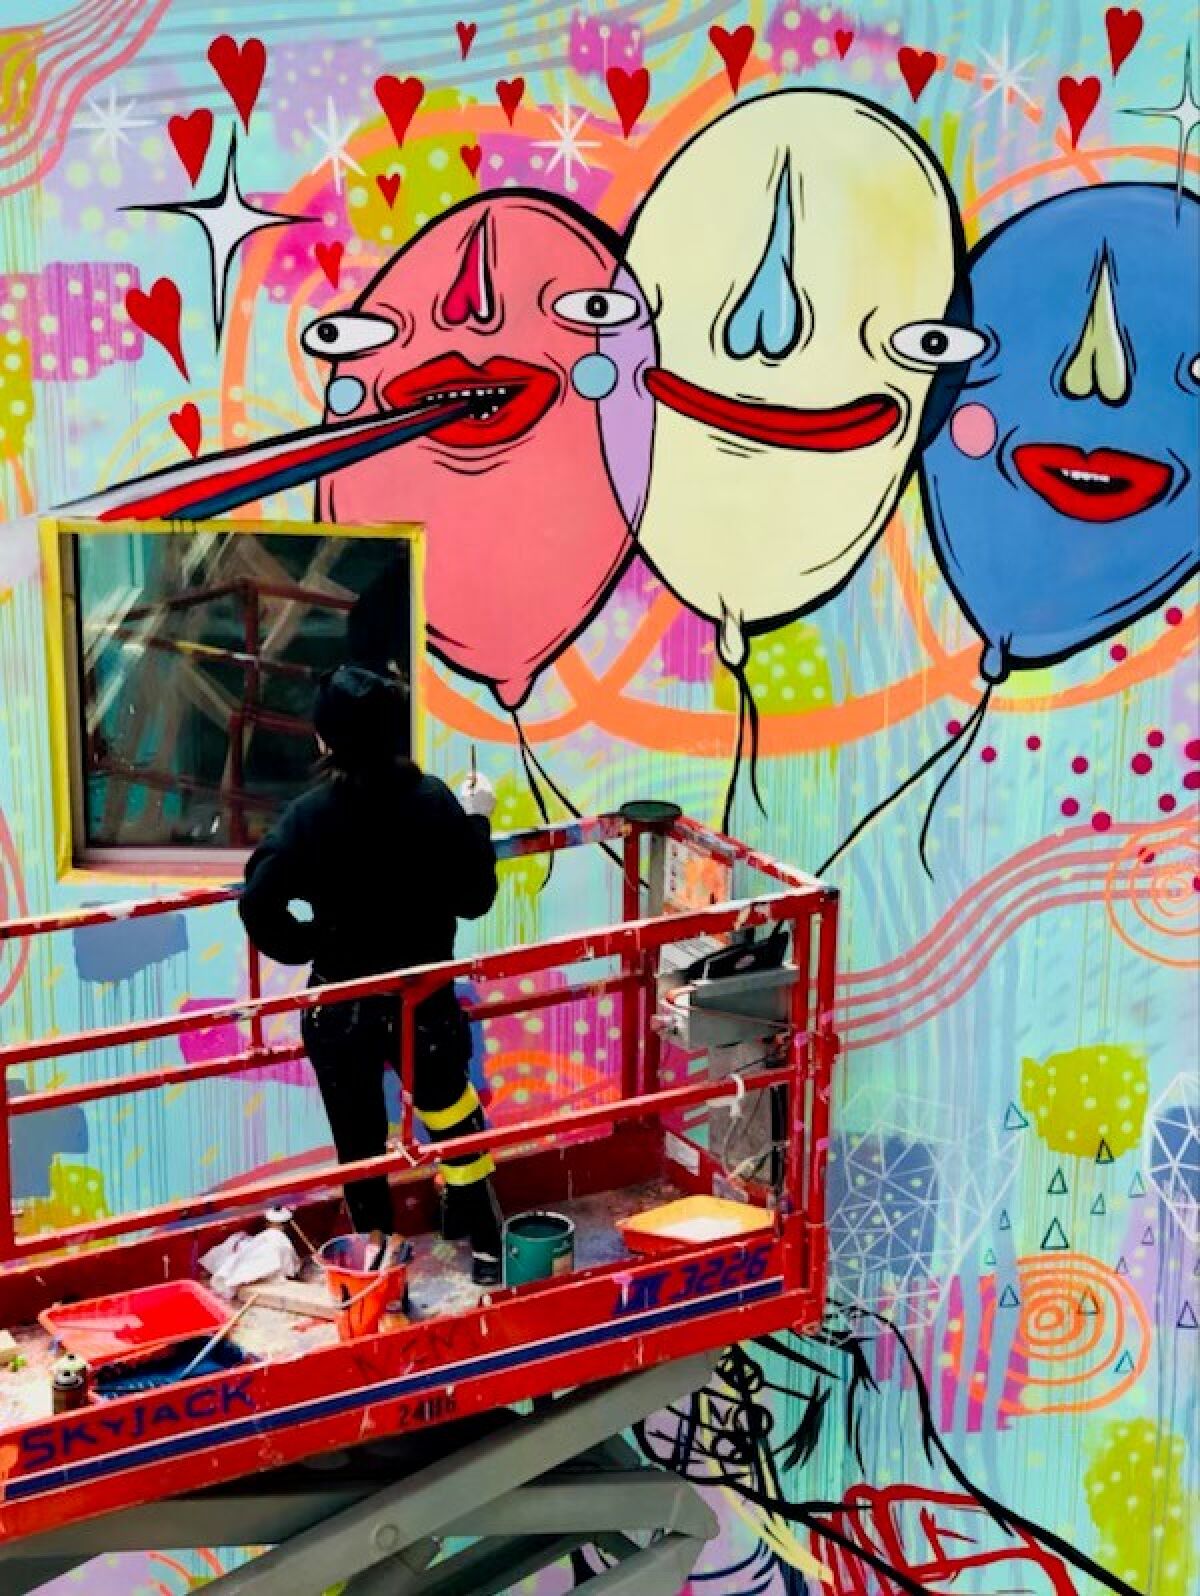 Paola Villaseñor, known as the artist Panca, working on a colorful mural